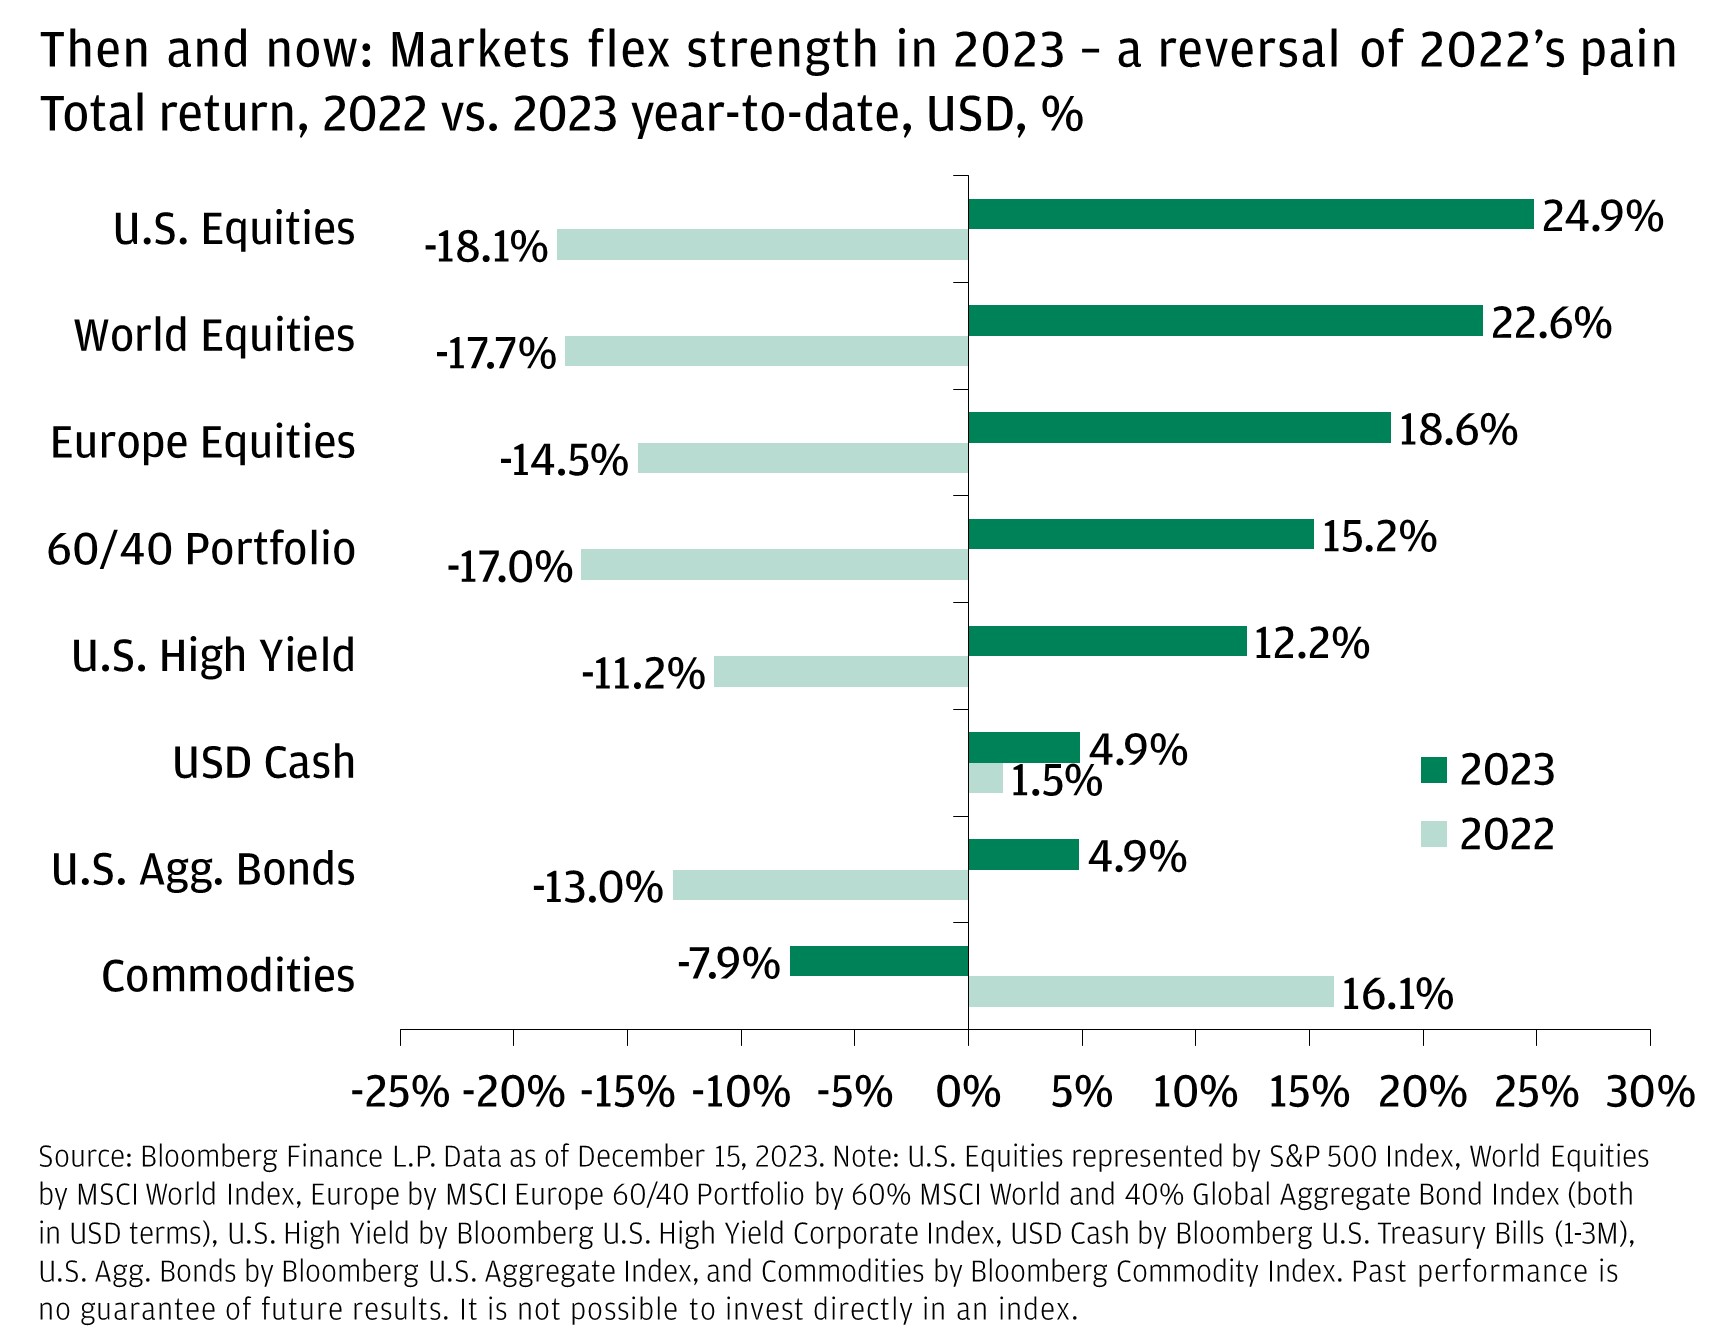 Then and now: Markets flex strength in 2023 – a reversal of 2022’s pain